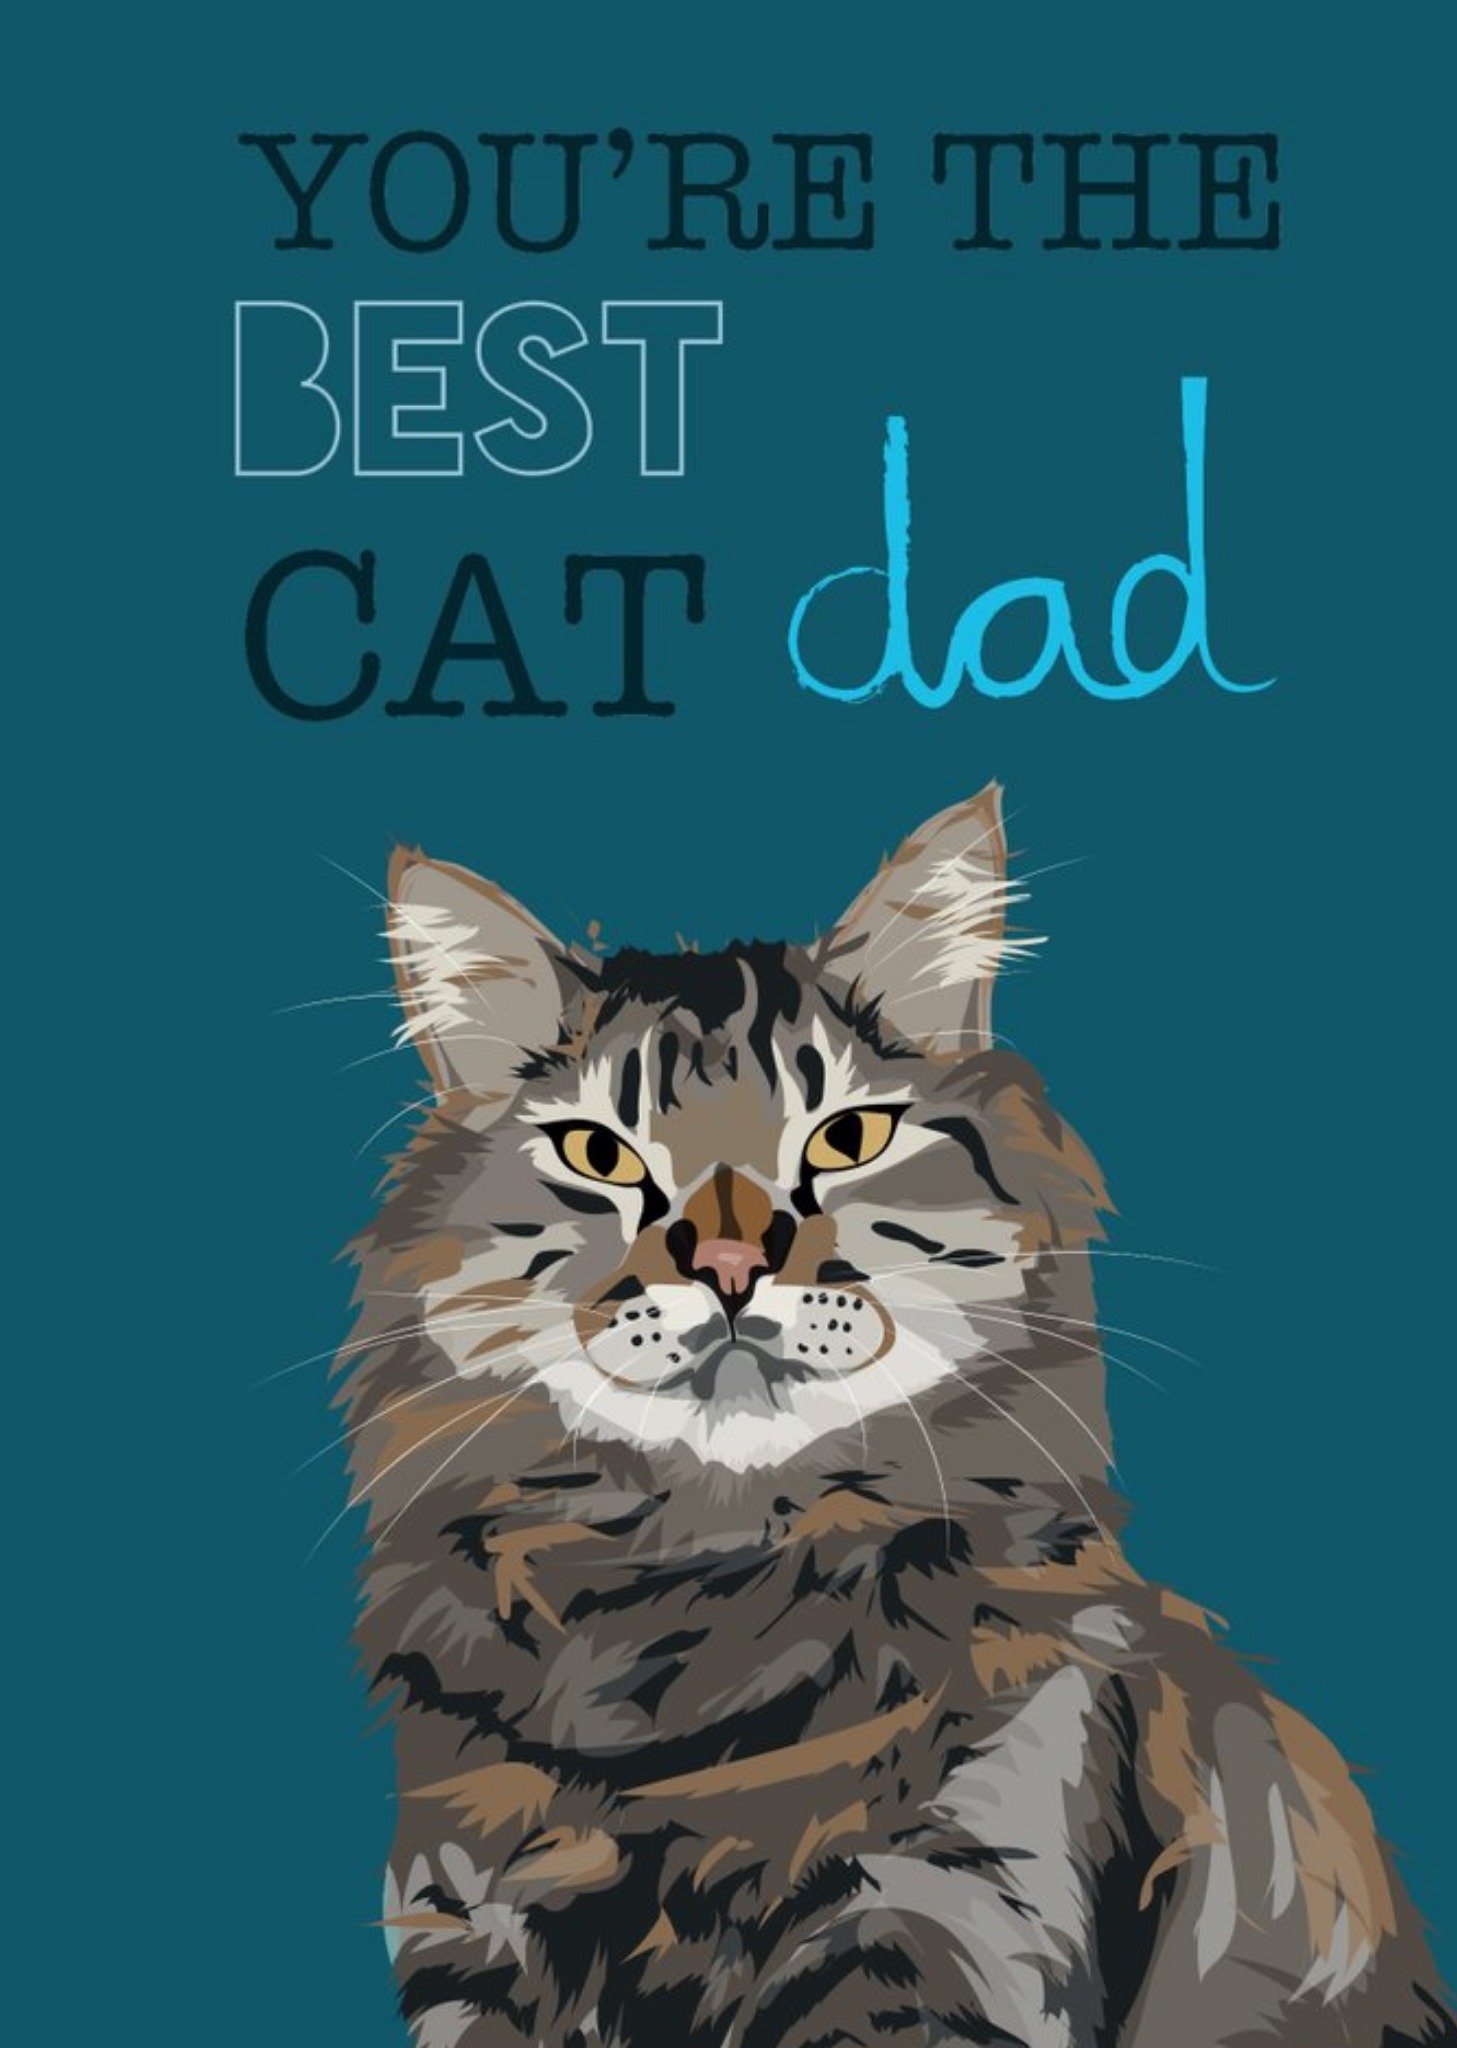 Moonpig Illustrated Youre The Best Cat Dad Ever Birthday Card, Large